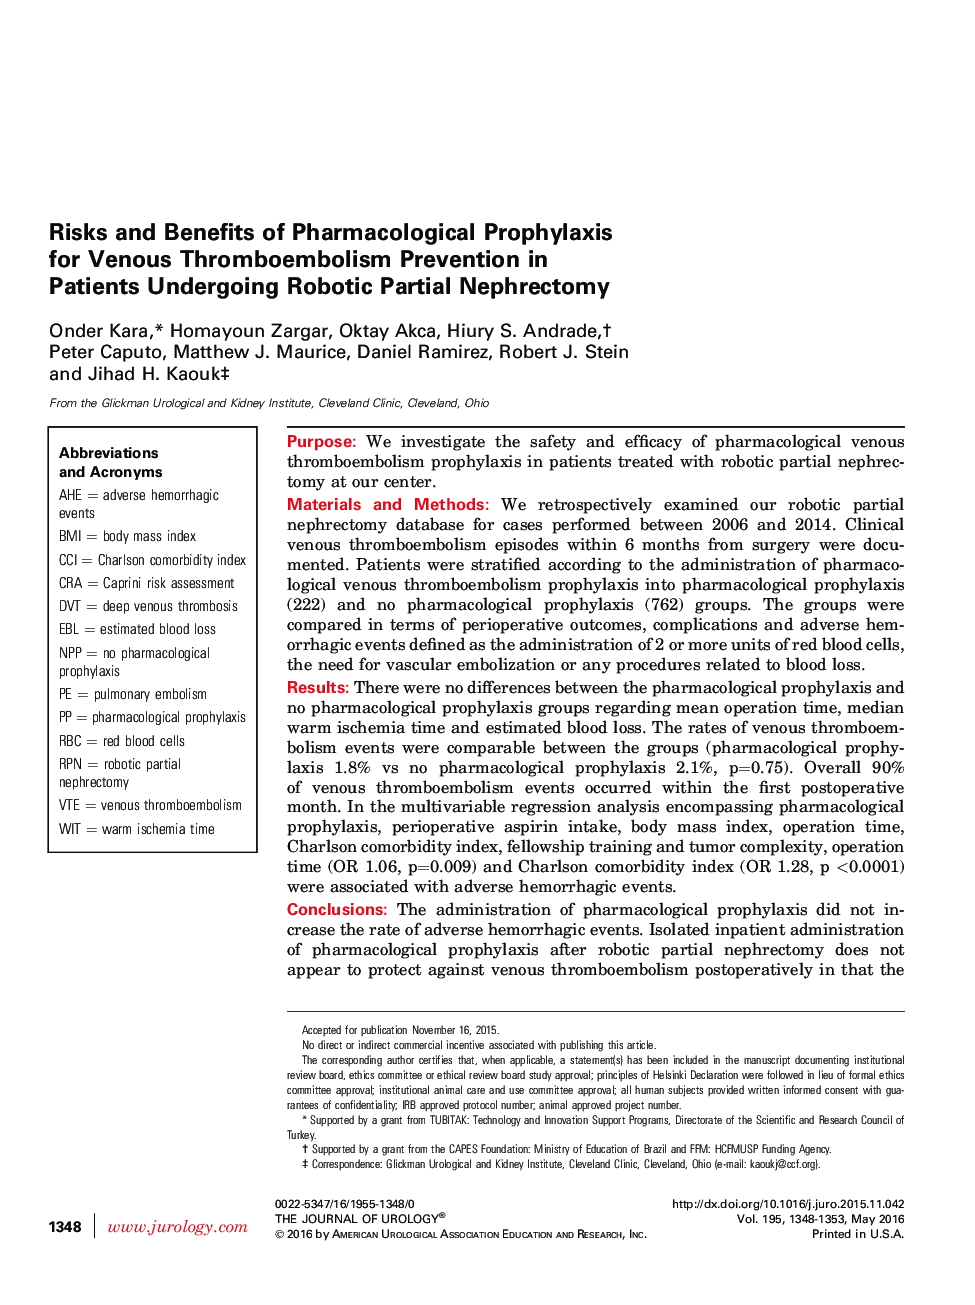 Risks and Benefits of Pharmacological Prophylaxis for Venous Thromboembolism Prevention in Patients Undergoing Robotic Partial Nephrectomy 